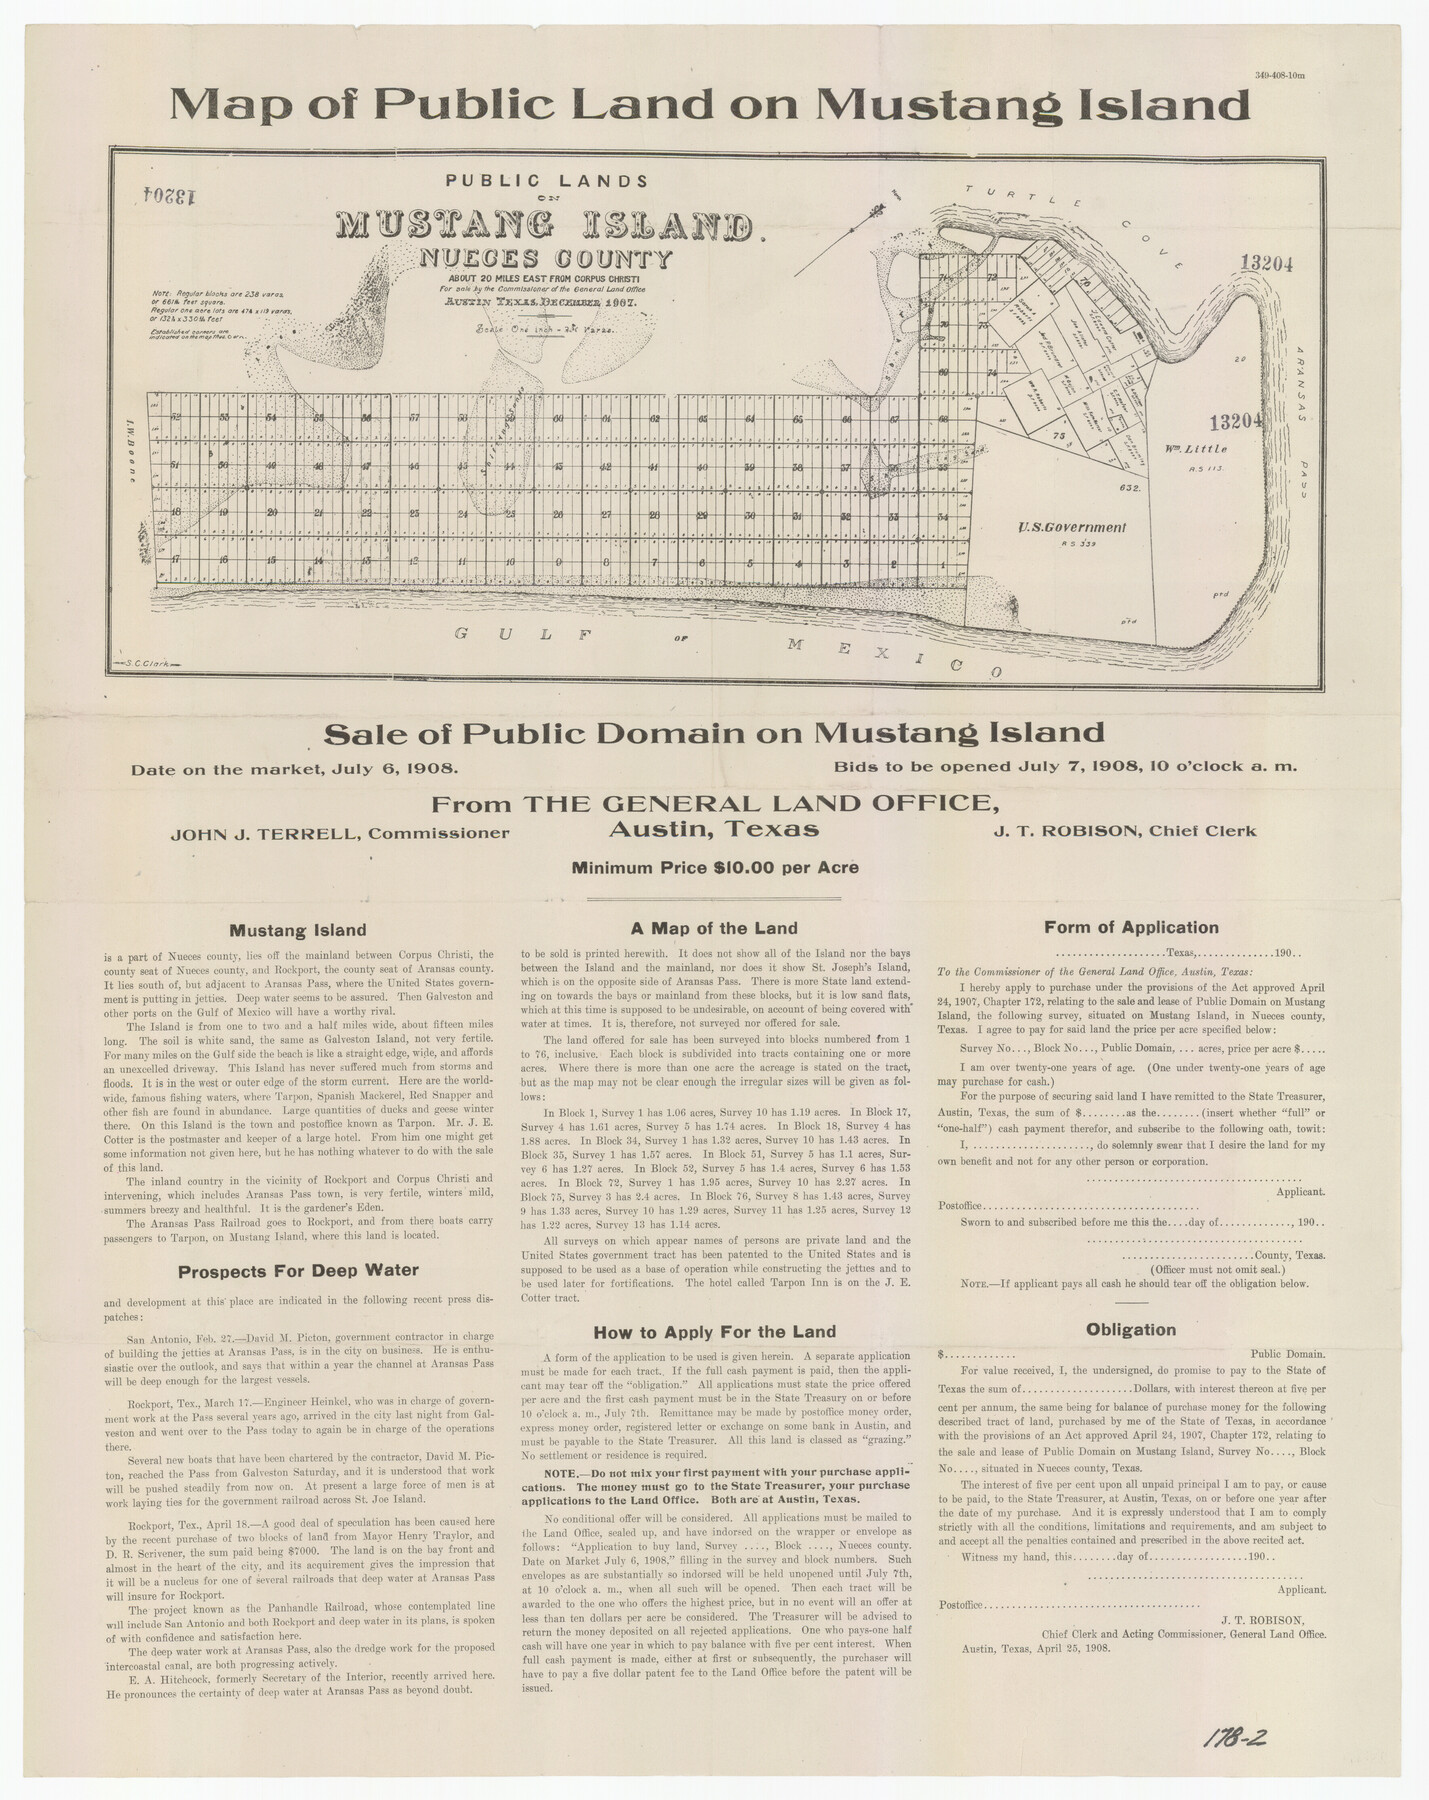 91492, Map of Public Land on Mustang Island, Twichell Survey Records